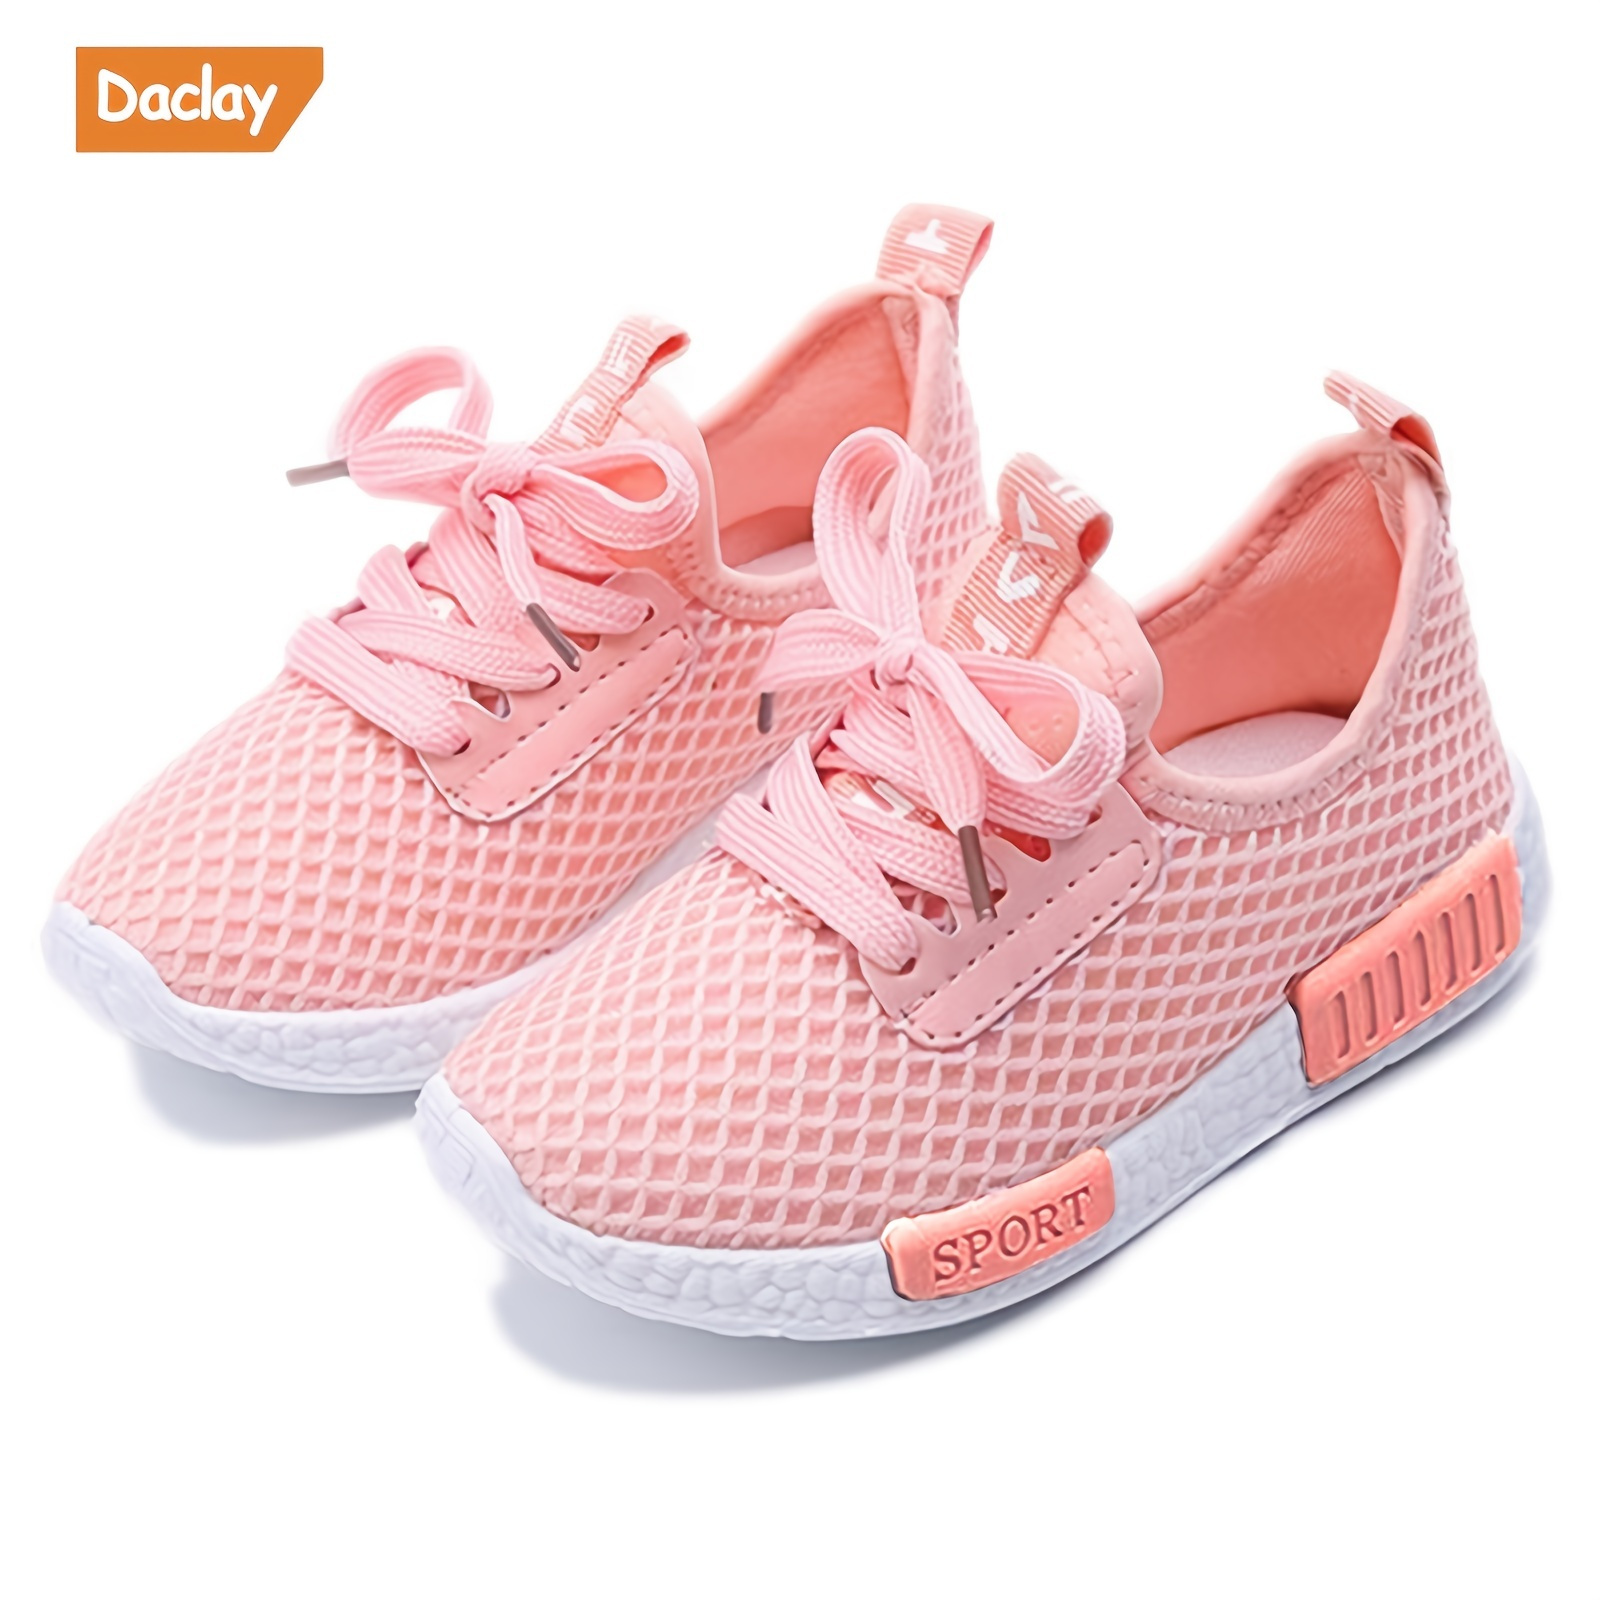 

Daclay Kids Mesh Shoes, Breathable Sandals For Spring And Autumn, Casual Walking Sneakers For Girls Boys School Students Teenager